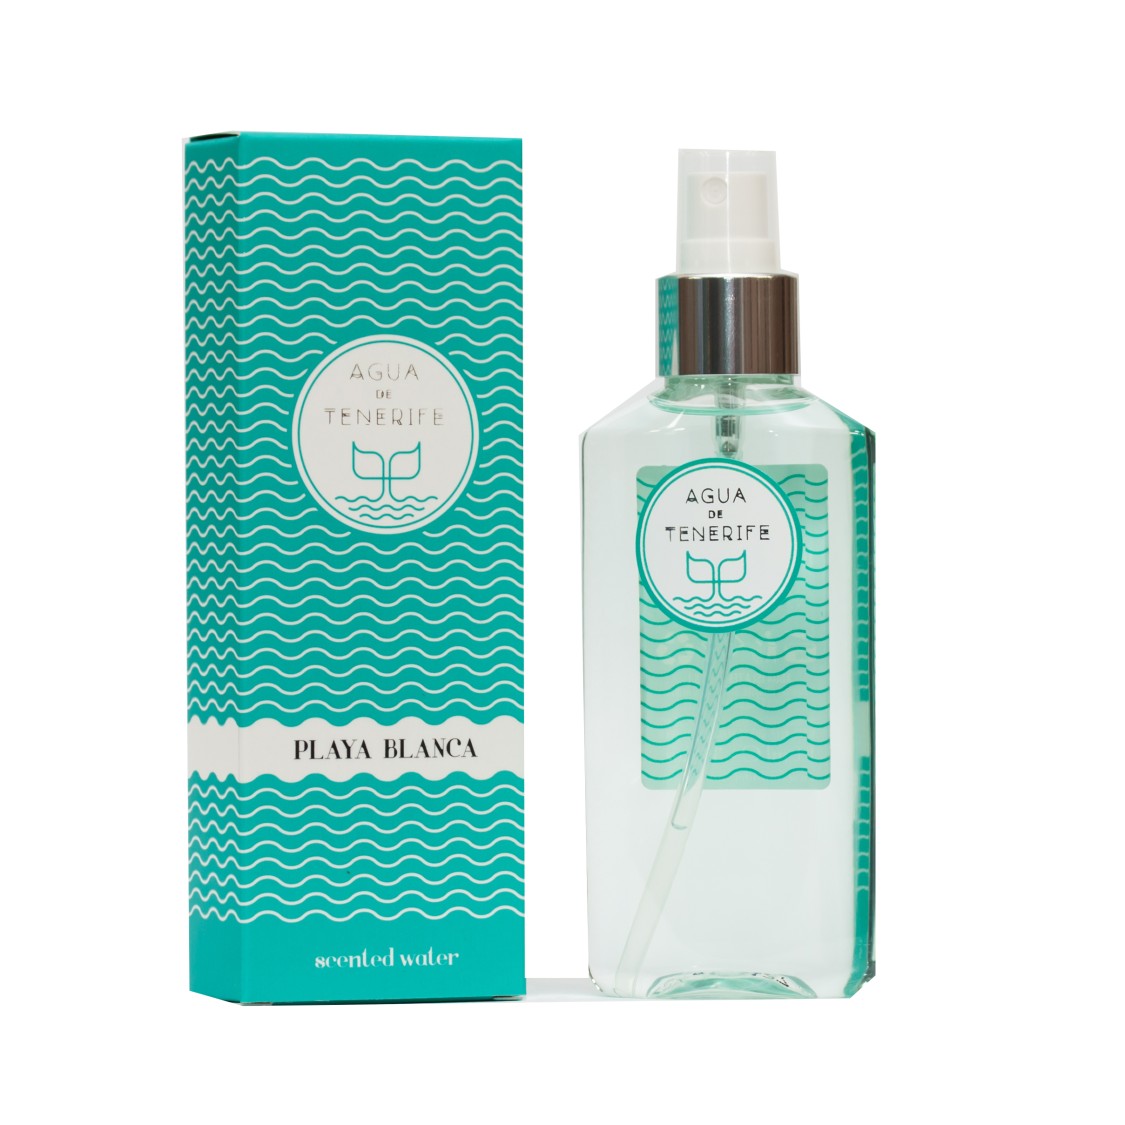 shop Agua de Tenerife  LAS FRAGANCIAS DE LA ISLA: Playa Blanca Scented Water 100 ml.
An exclusive, sweet and passionate fragrance, inspired by the uncontaminated coasts of Tenerife number 50